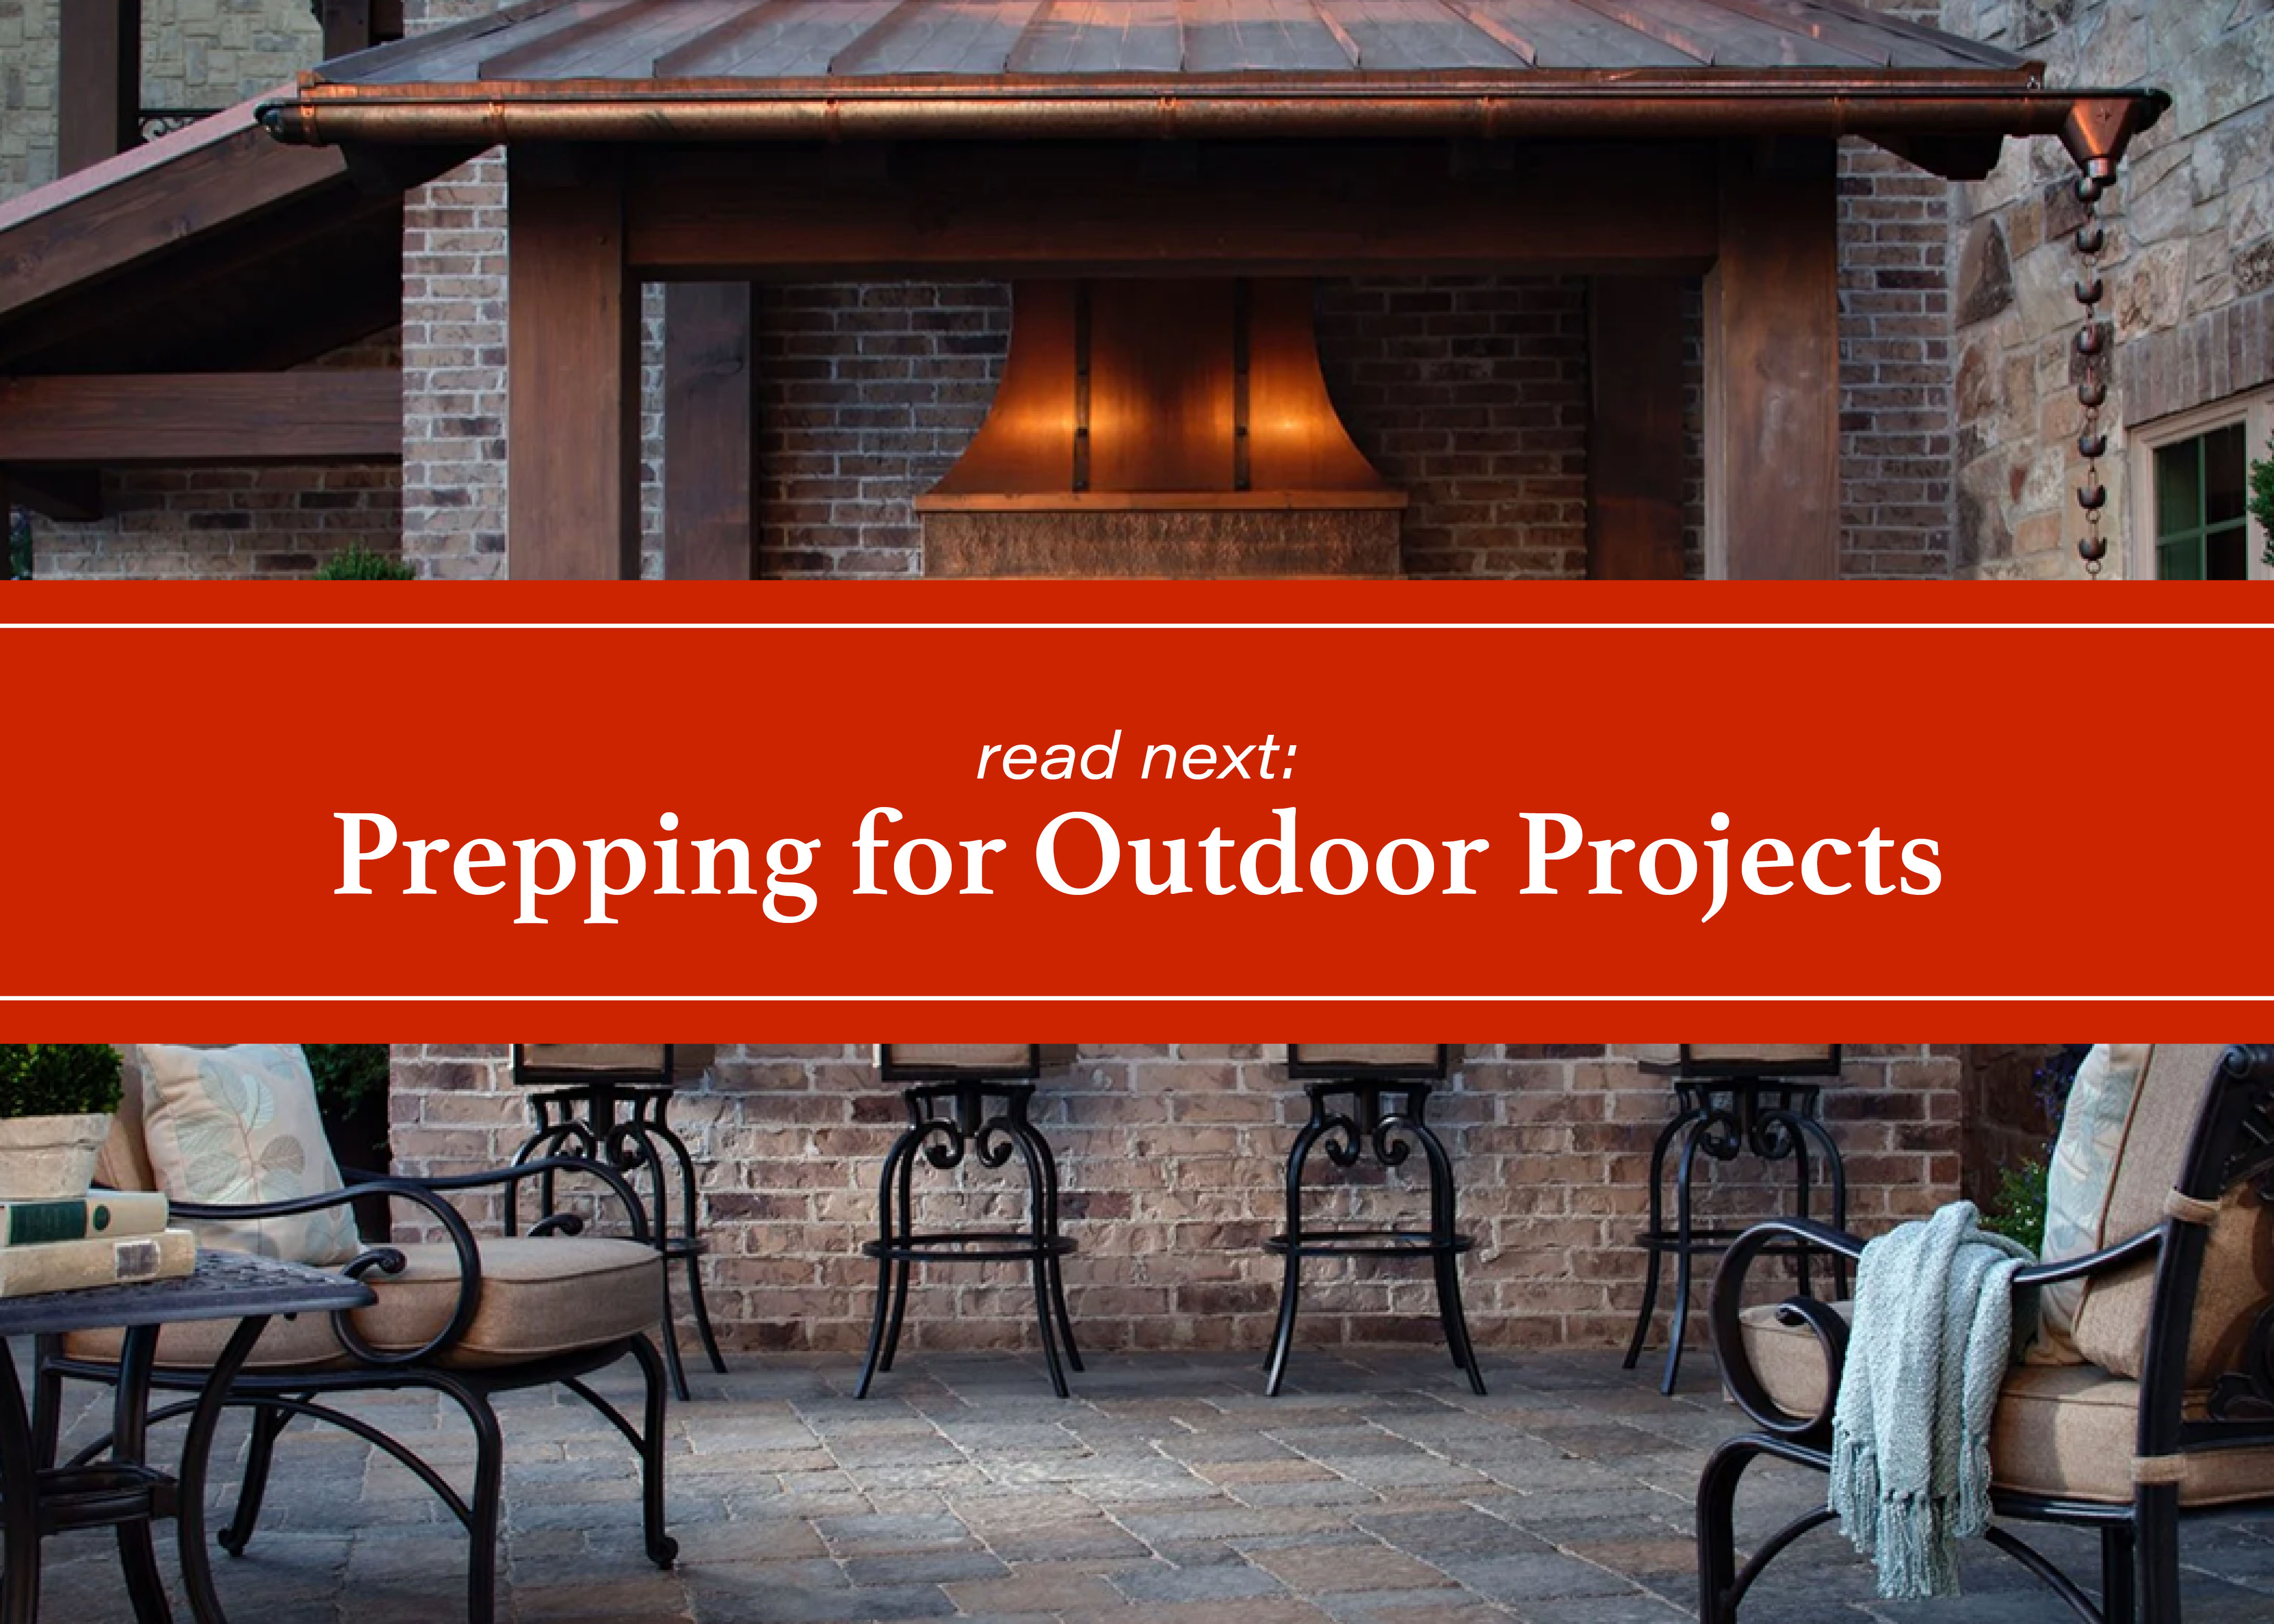 prep for outdoor projects 2